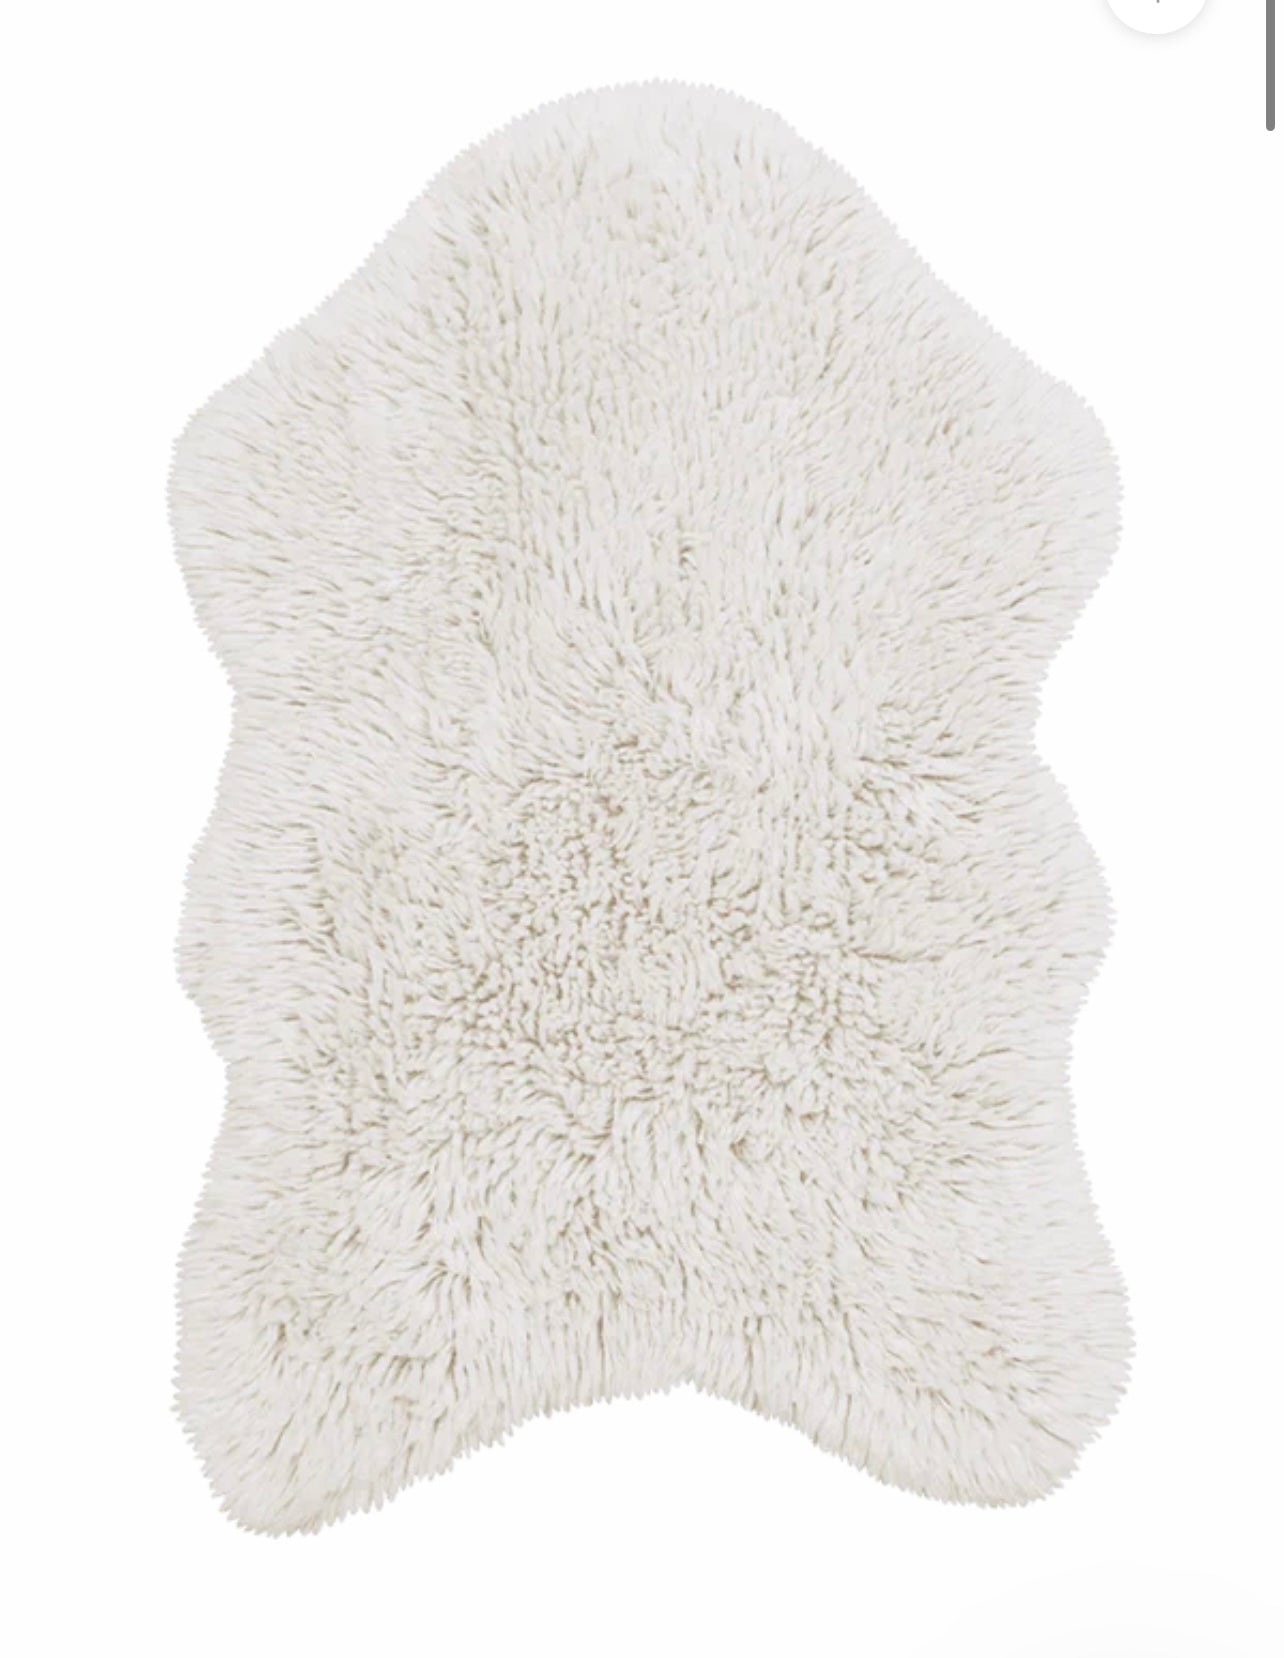 Woolable rug woolly sheep white